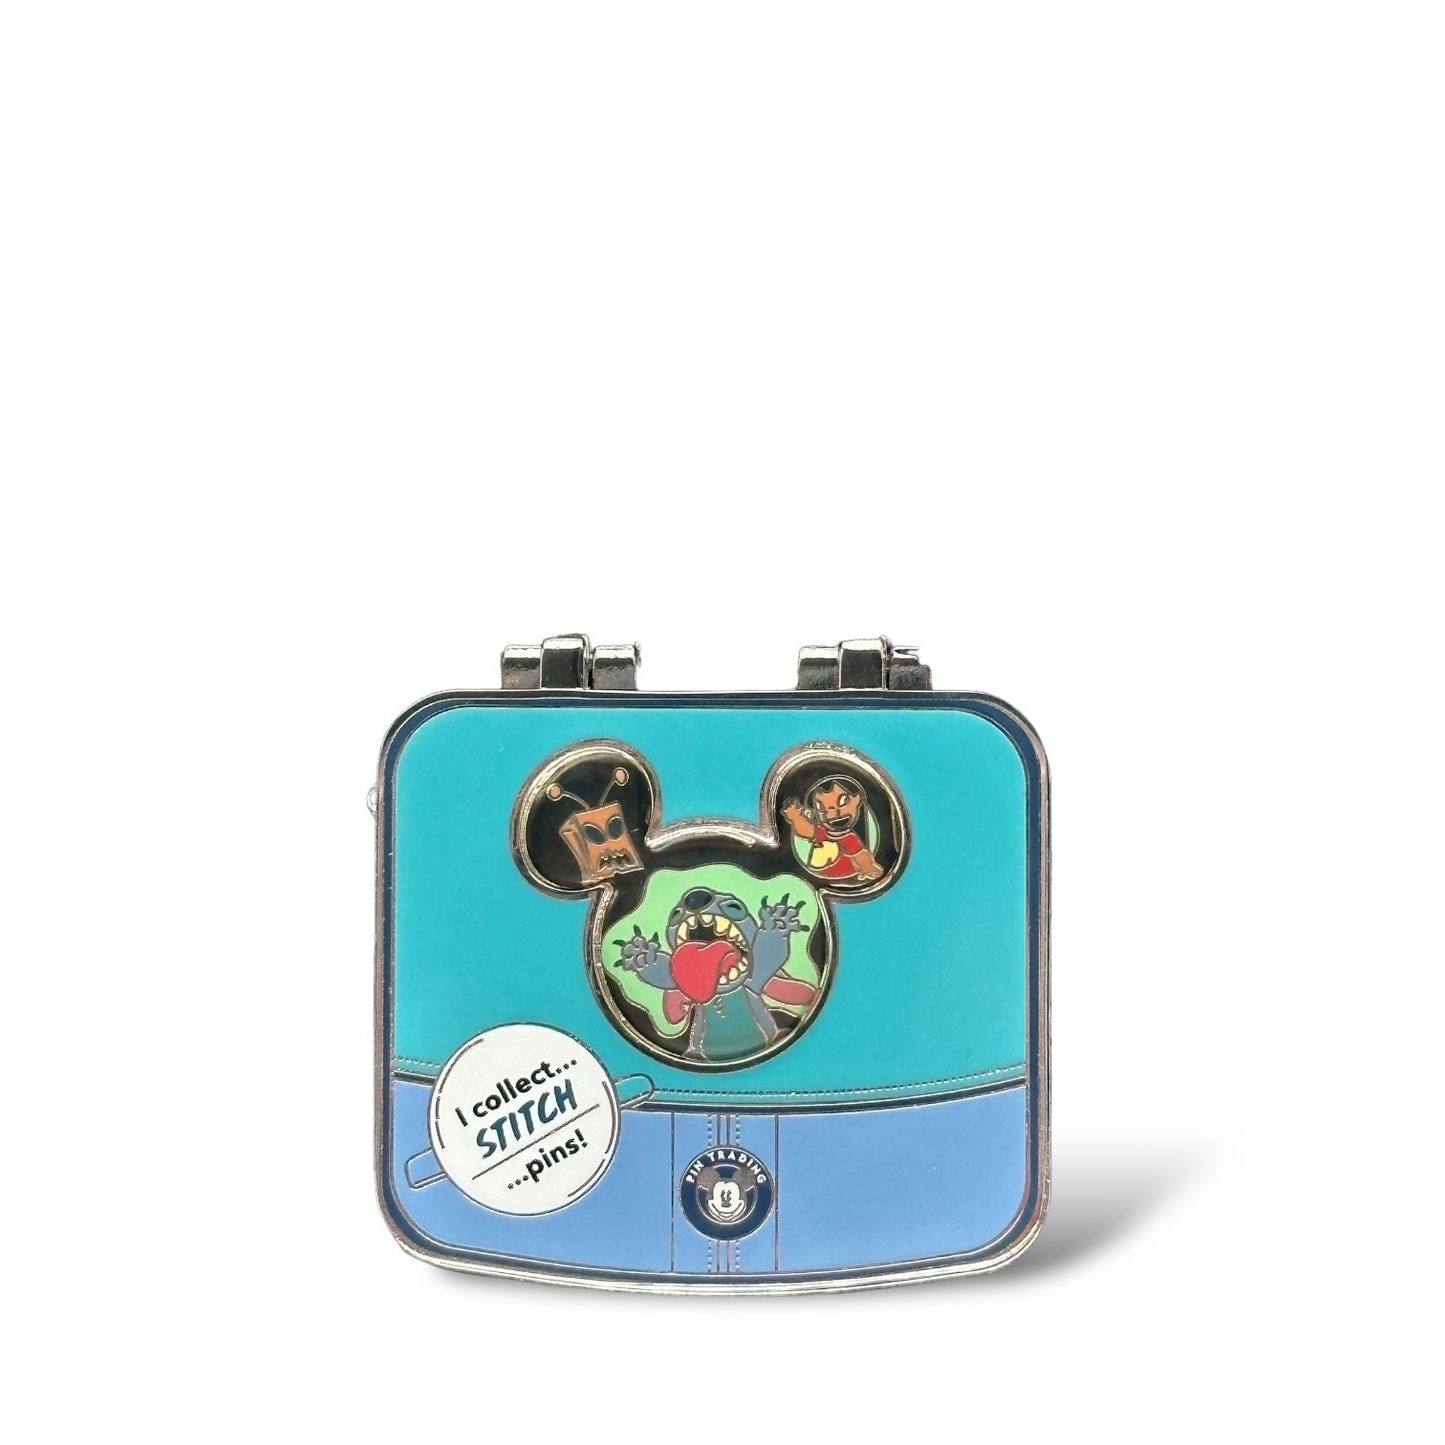 Disney Store I Collect Pin Bag Stitch Hinged Pin